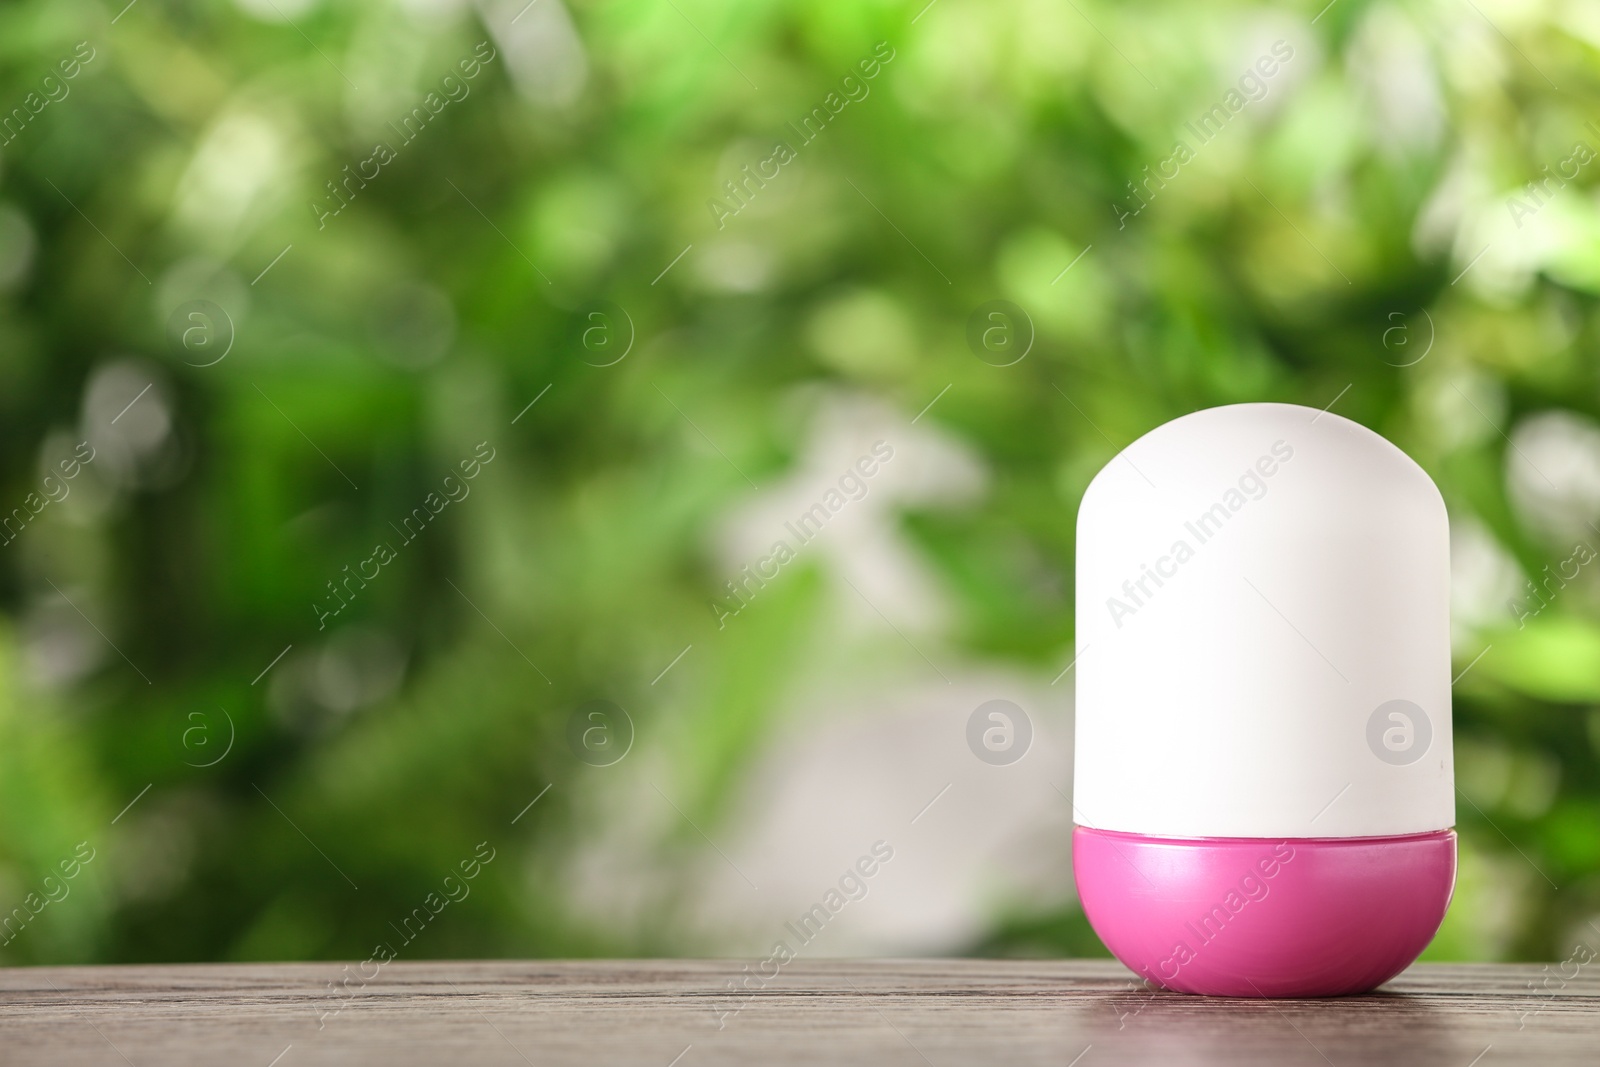 Photo of Deodorant container on wooden table against blurred background. Space for text